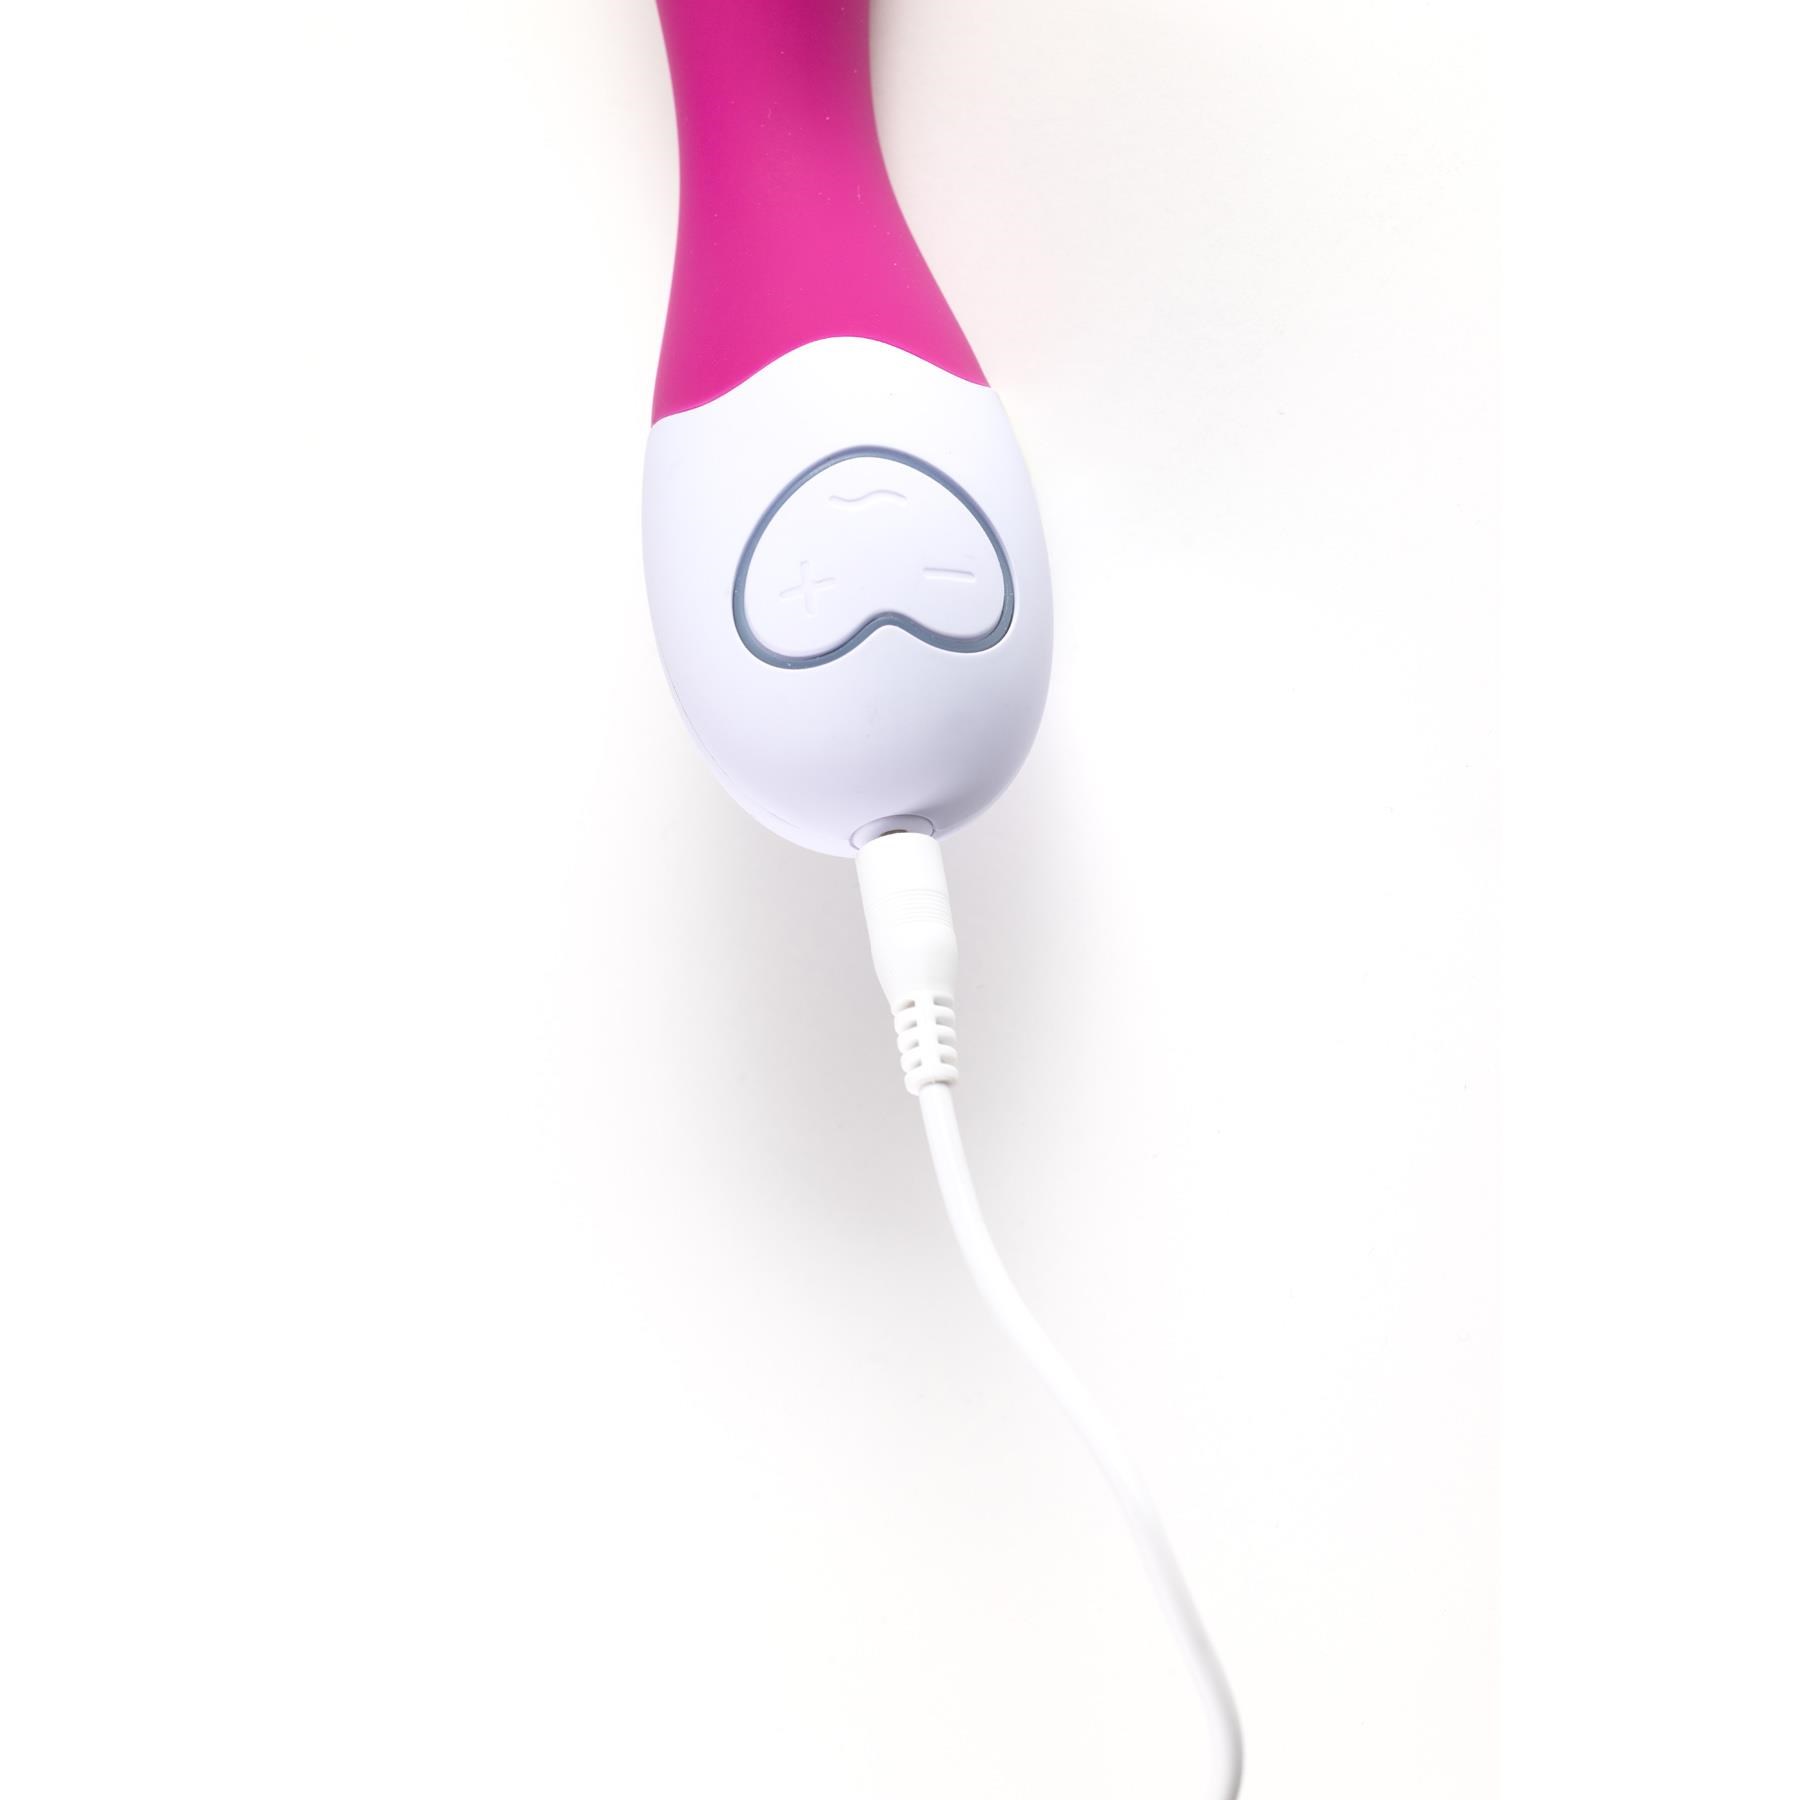 OhMiBod Lovelife Cuddle G-Spot Massager - Showing Where Charger Cable is Placed - Pink